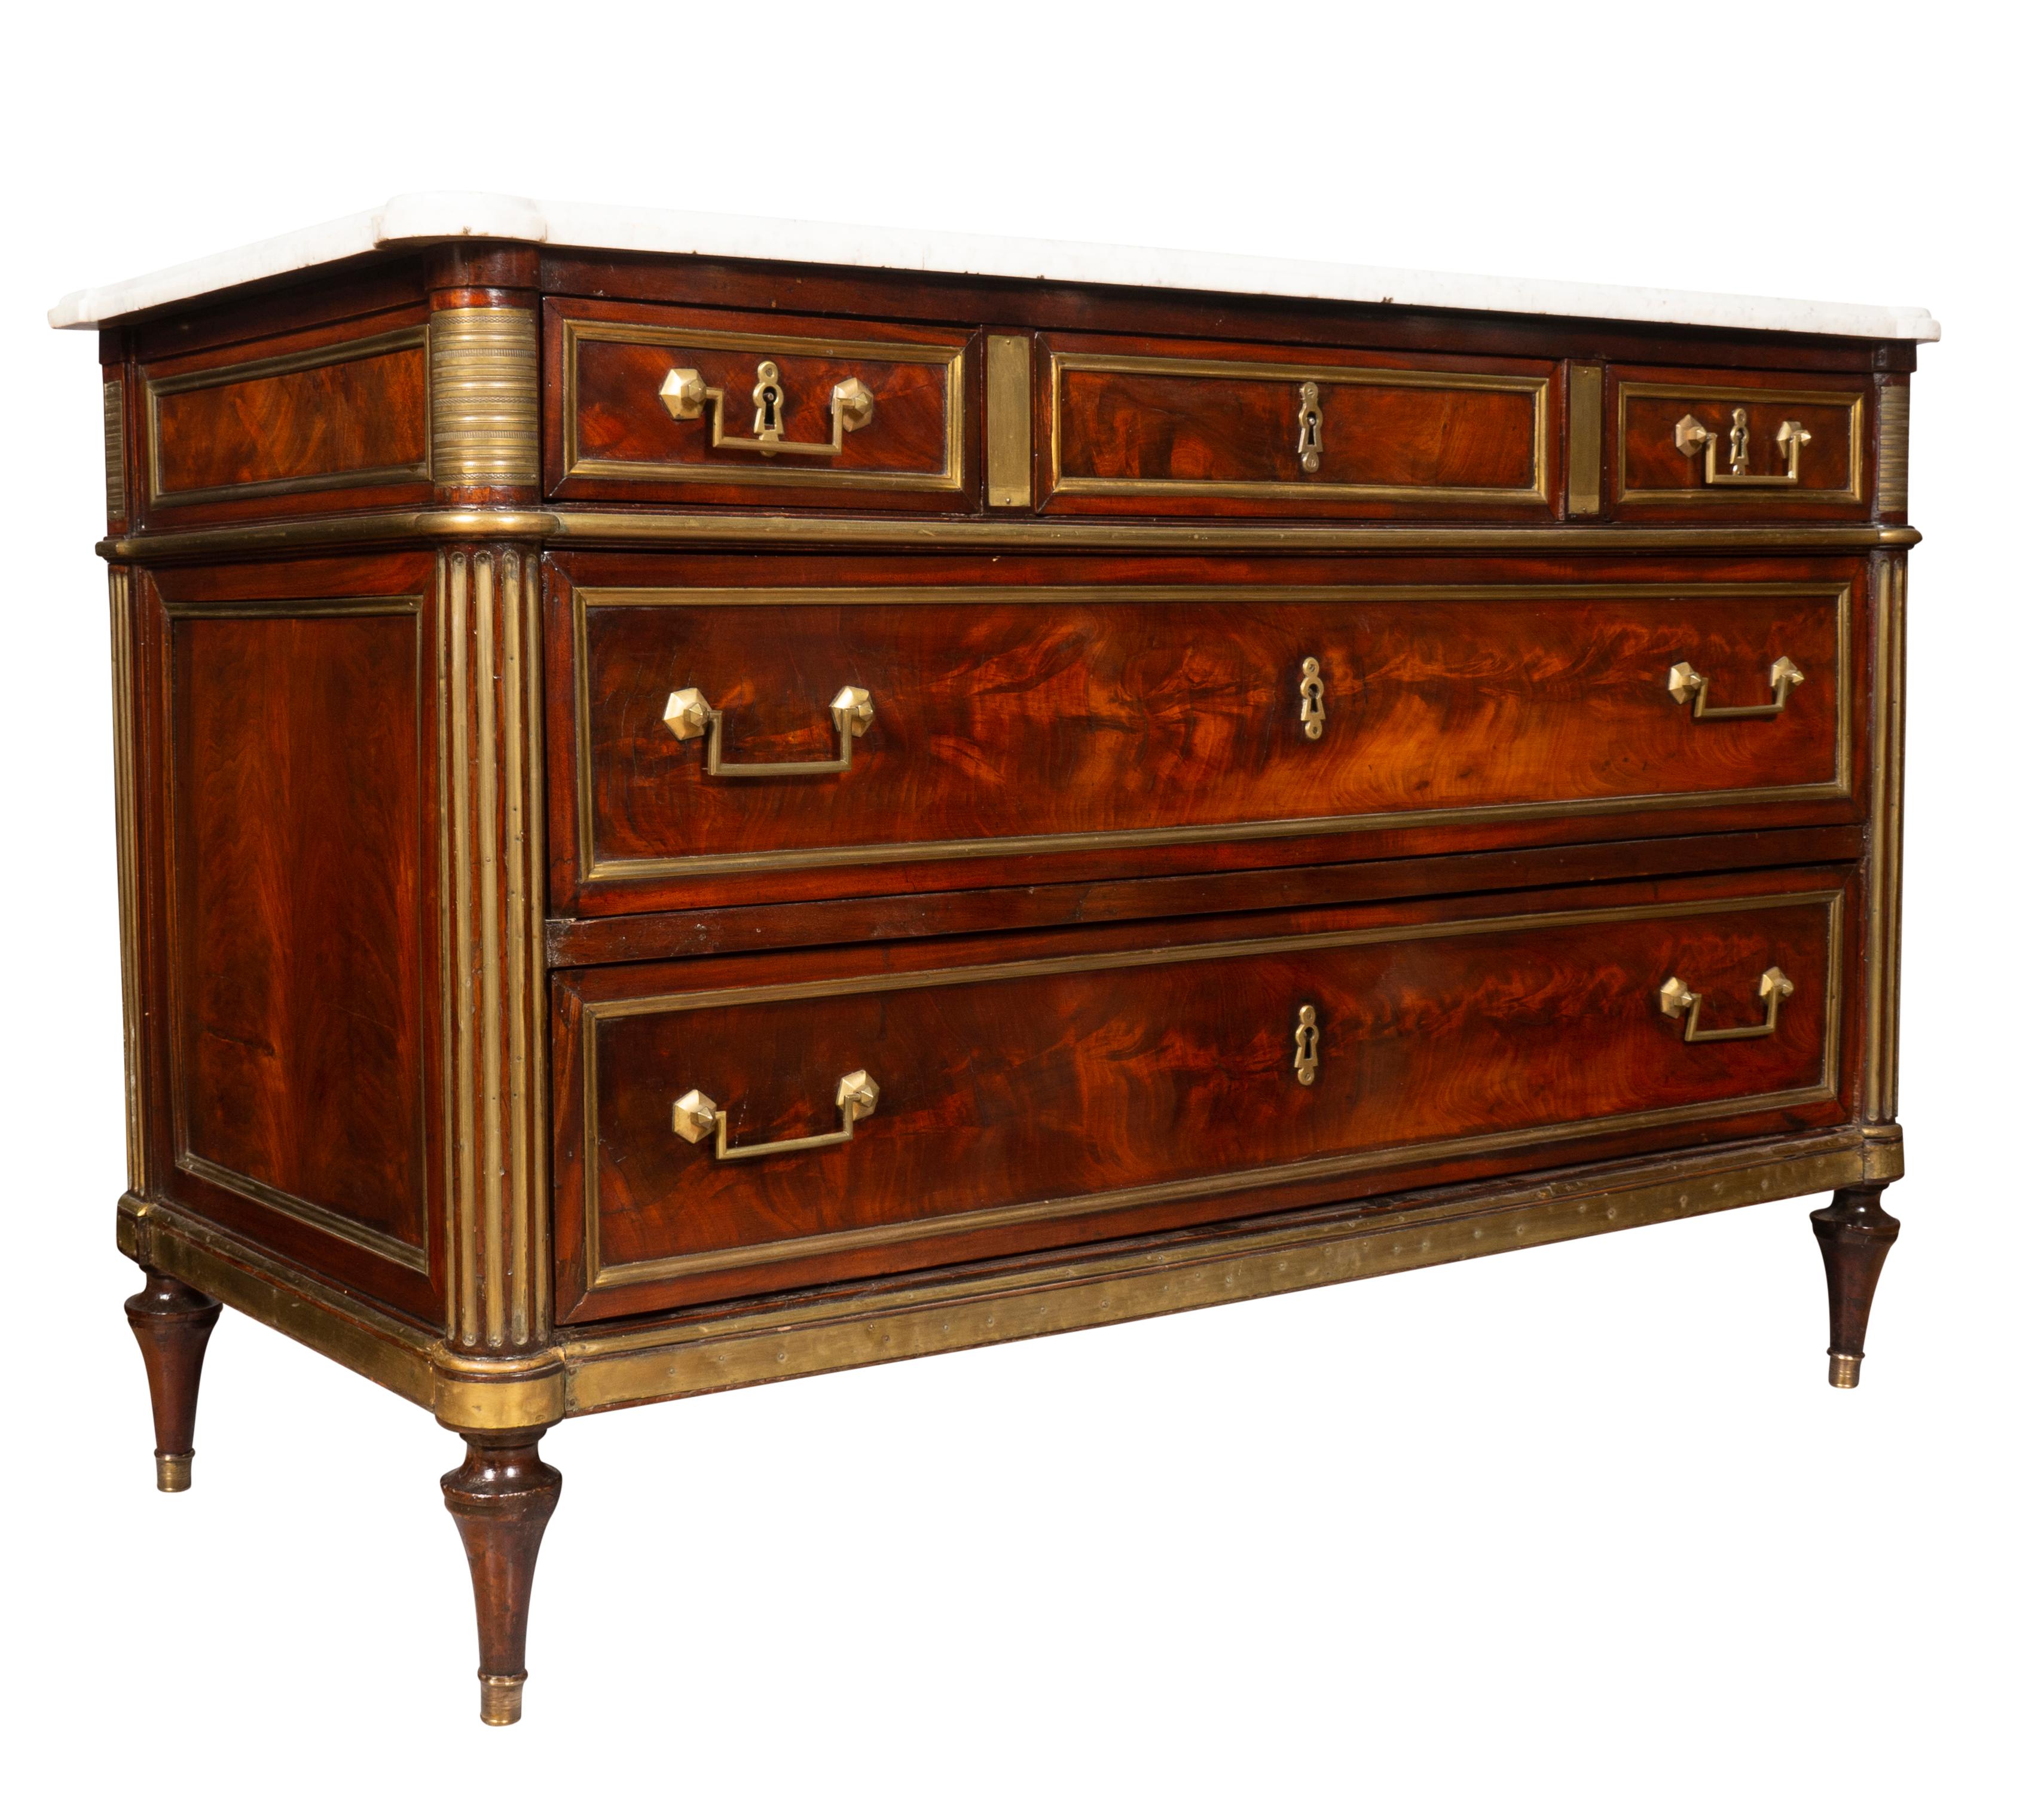 Late 18th Century Directoire Mahogany And Brass Mounted Commode For Sale